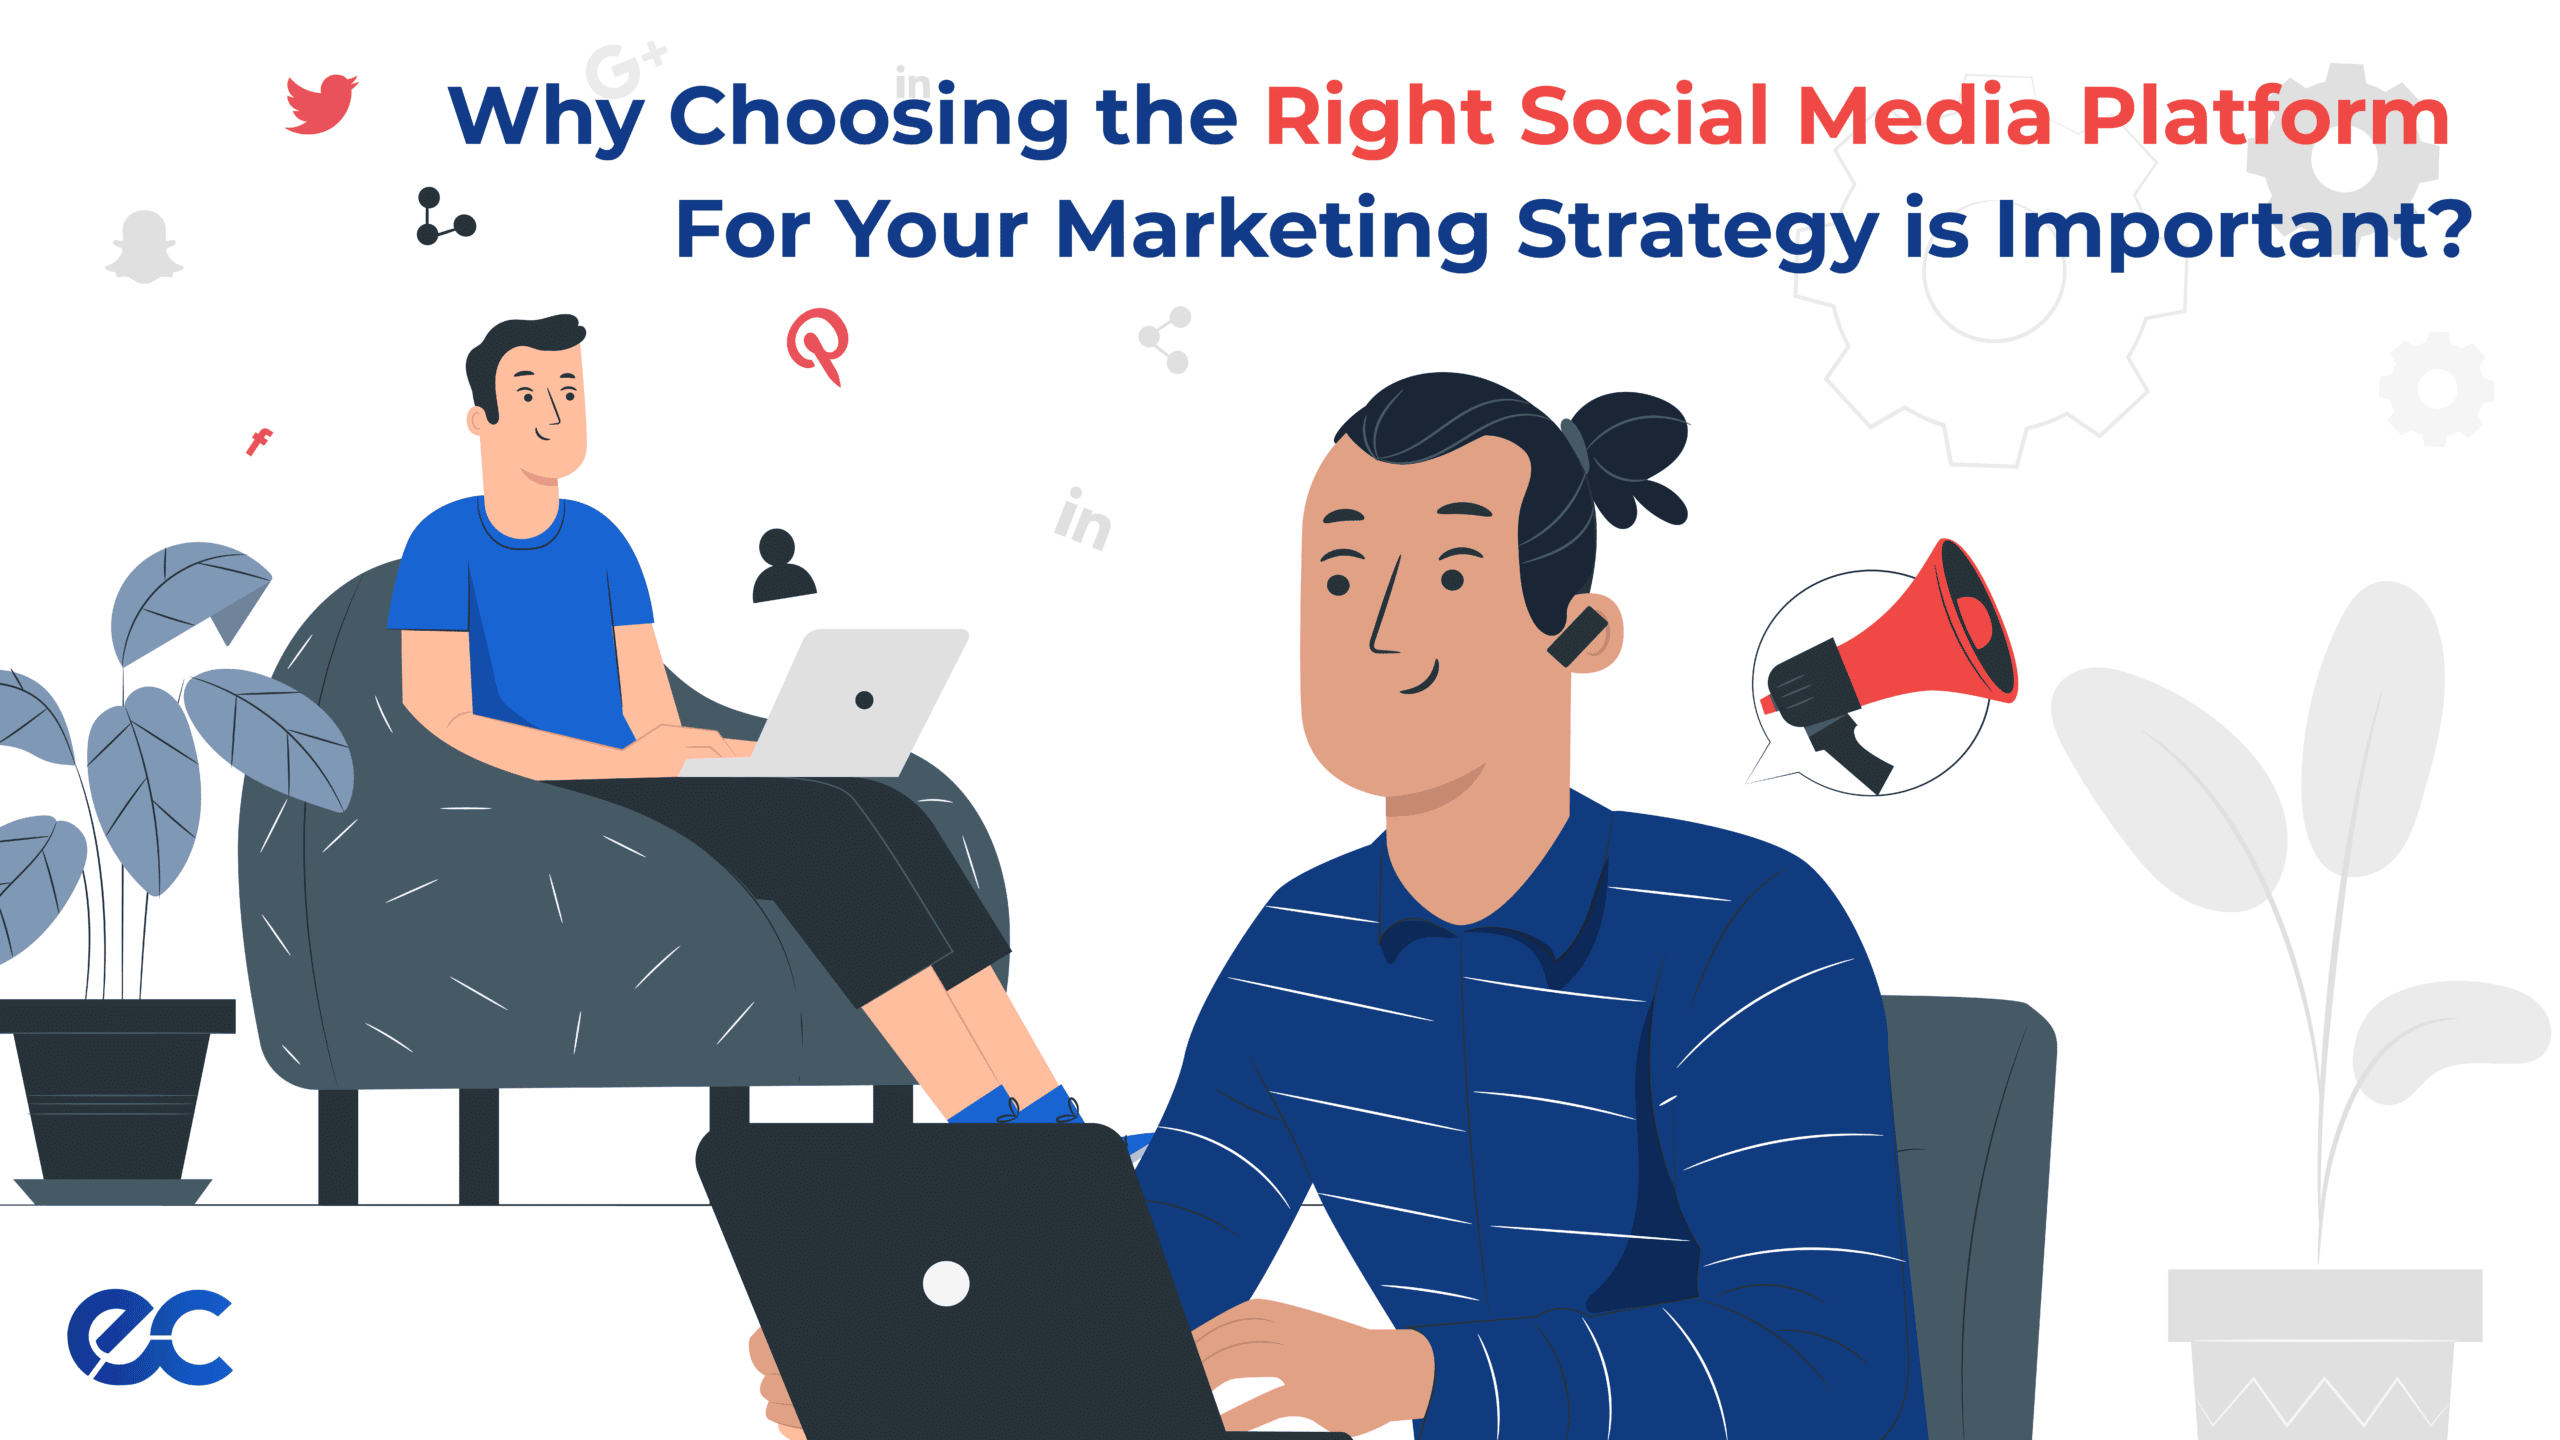 Why Choosing the Right Social Media Platform for Your Marketing Strategy is Important?